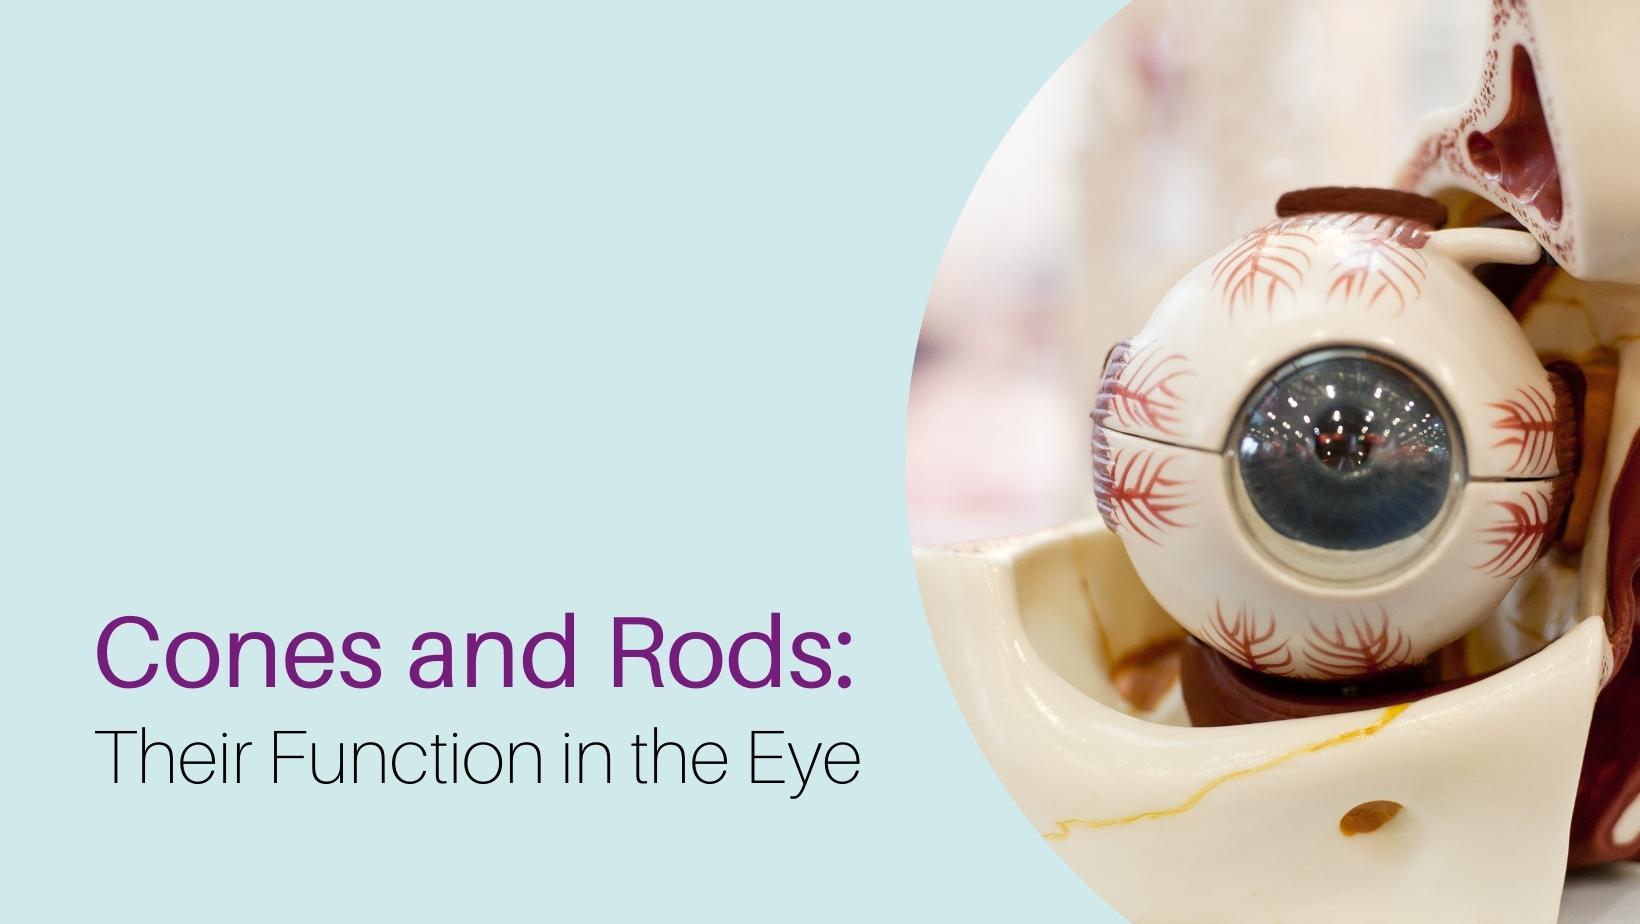 How Cones and Rods Function in the Eye